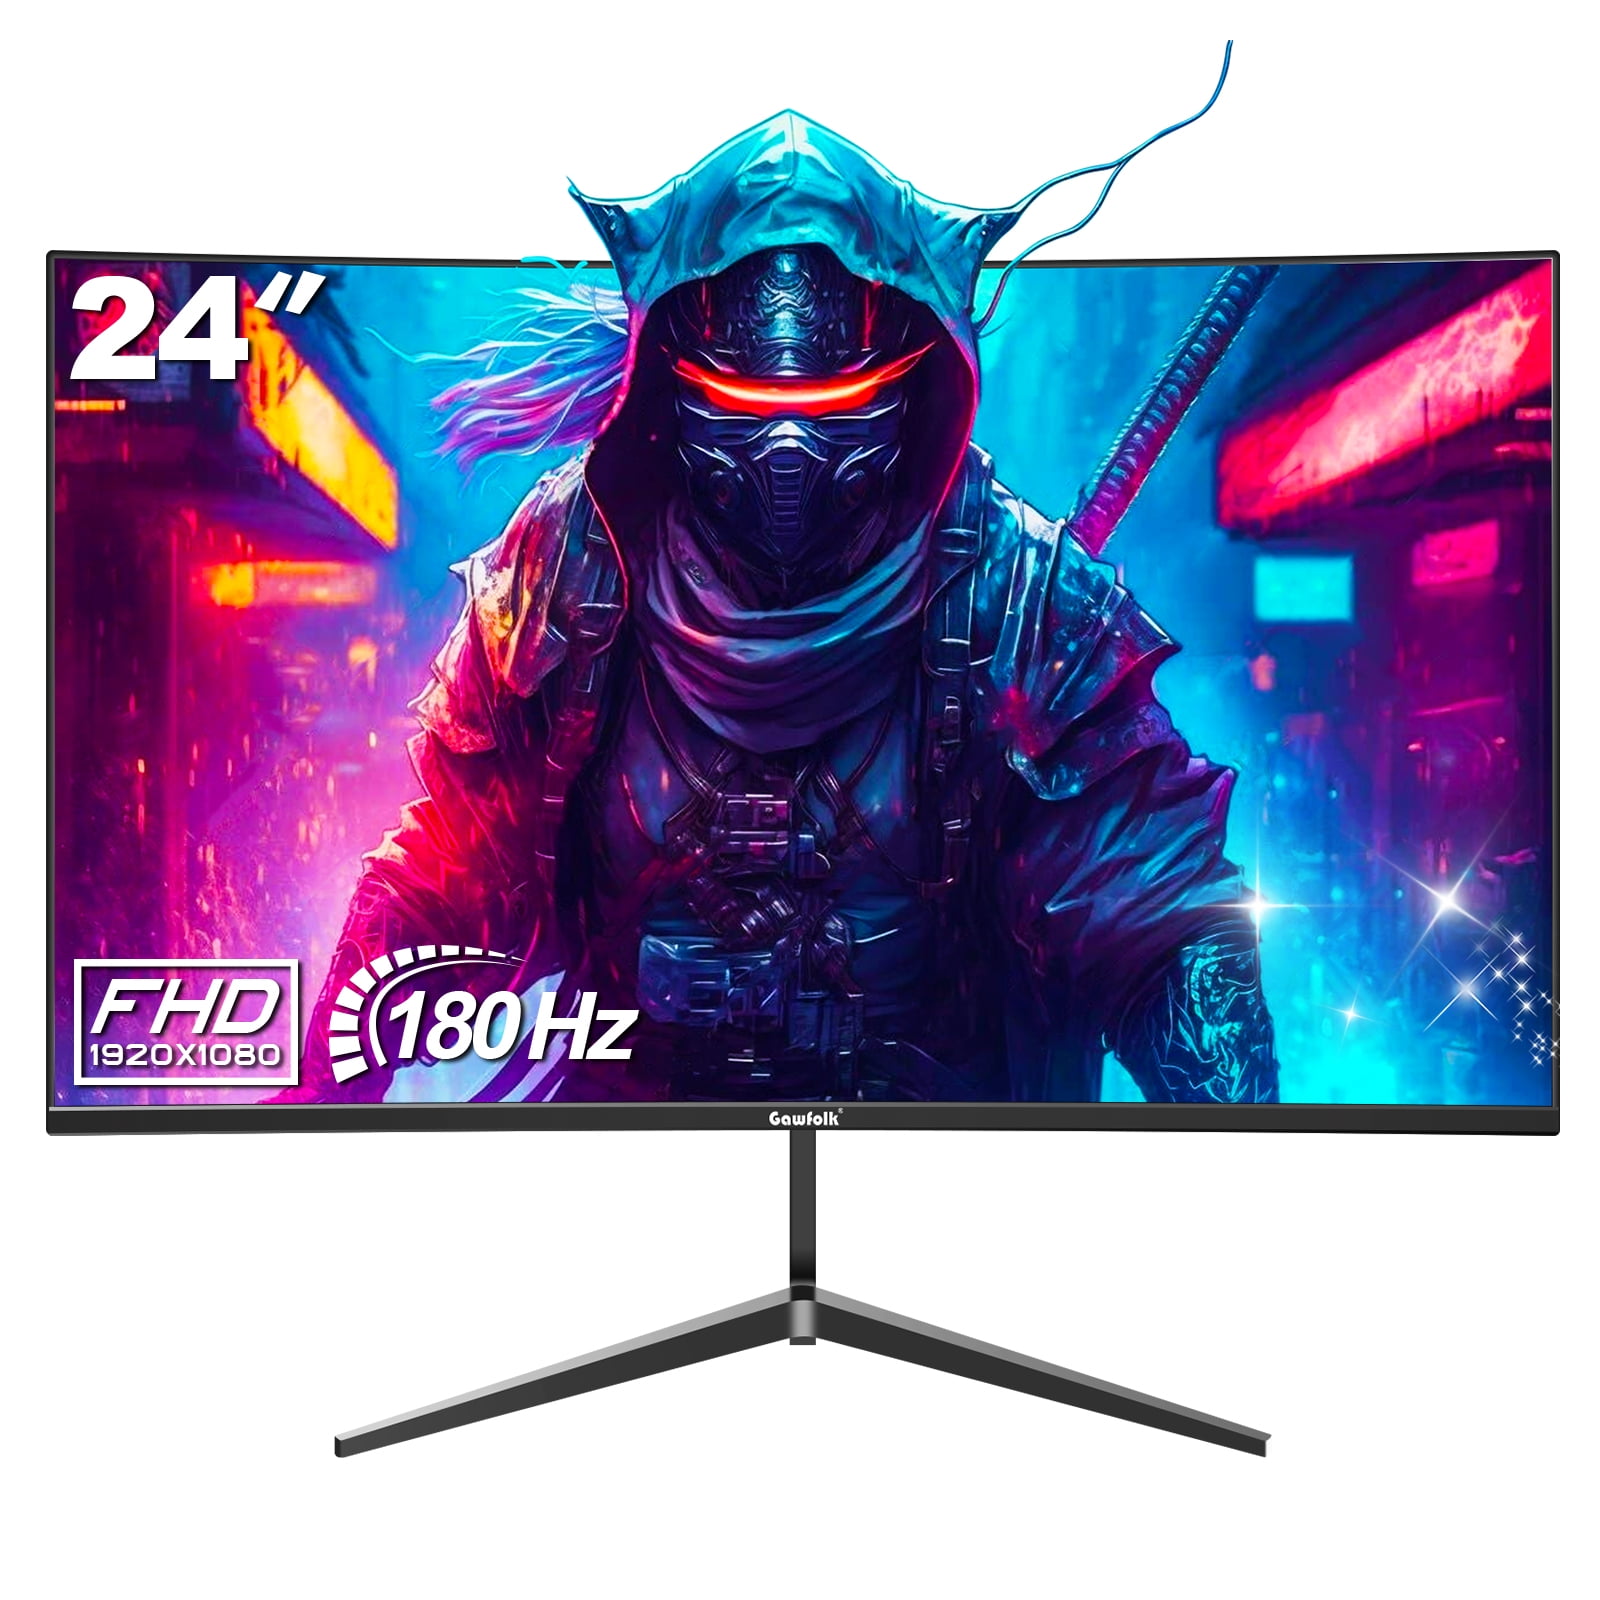 Gawfolk Gaming Monitor 165Hz/180Hz 24-inch 1080p Curved Computer PC Monitor  , Eye-Care Technology, DP, HDMI, Black, Wall Mounting 